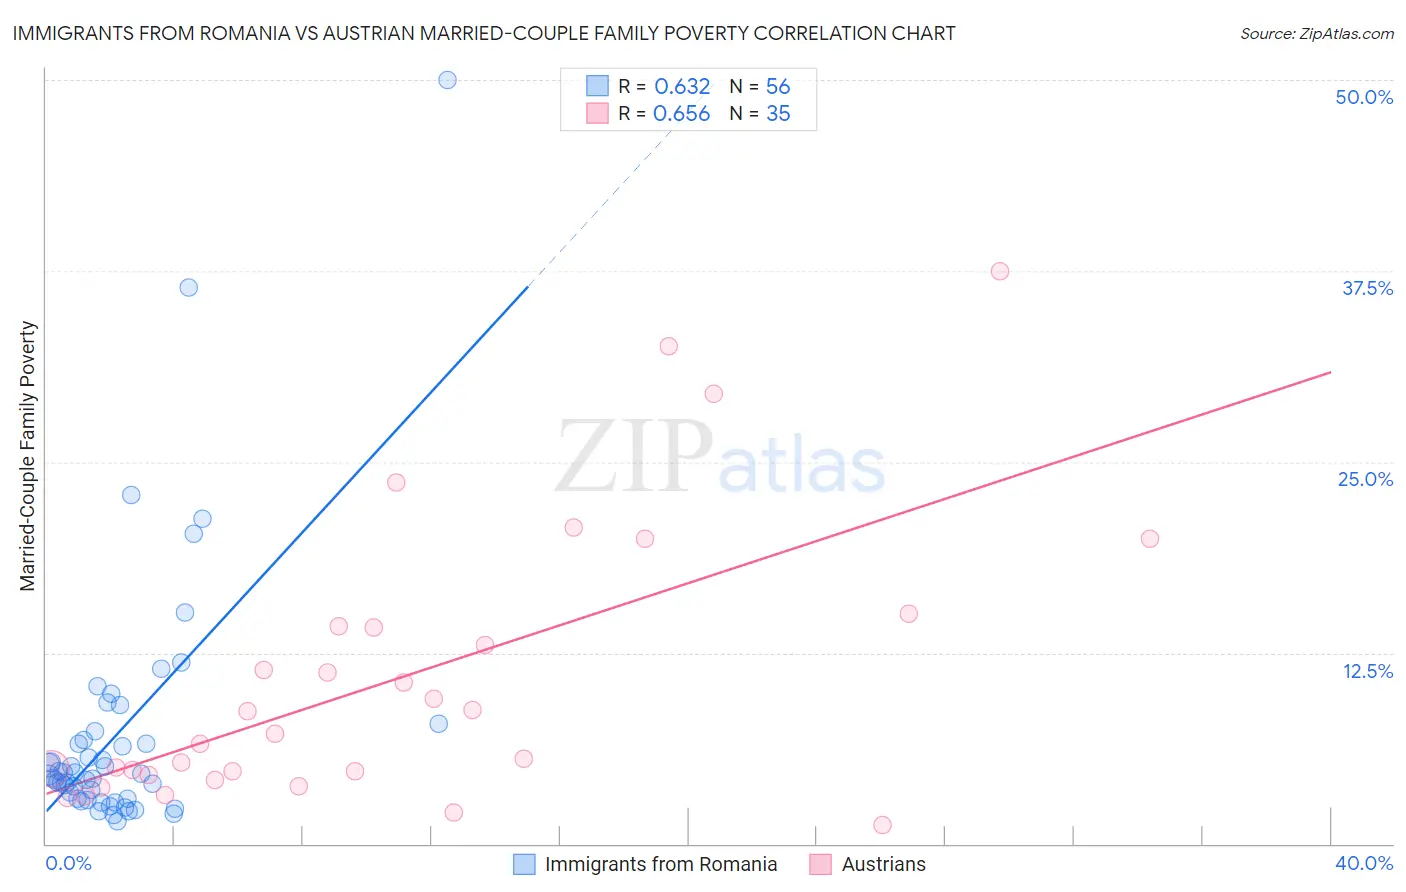 Immigrants from Romania vs Austrian Married-Couple Family Poverty